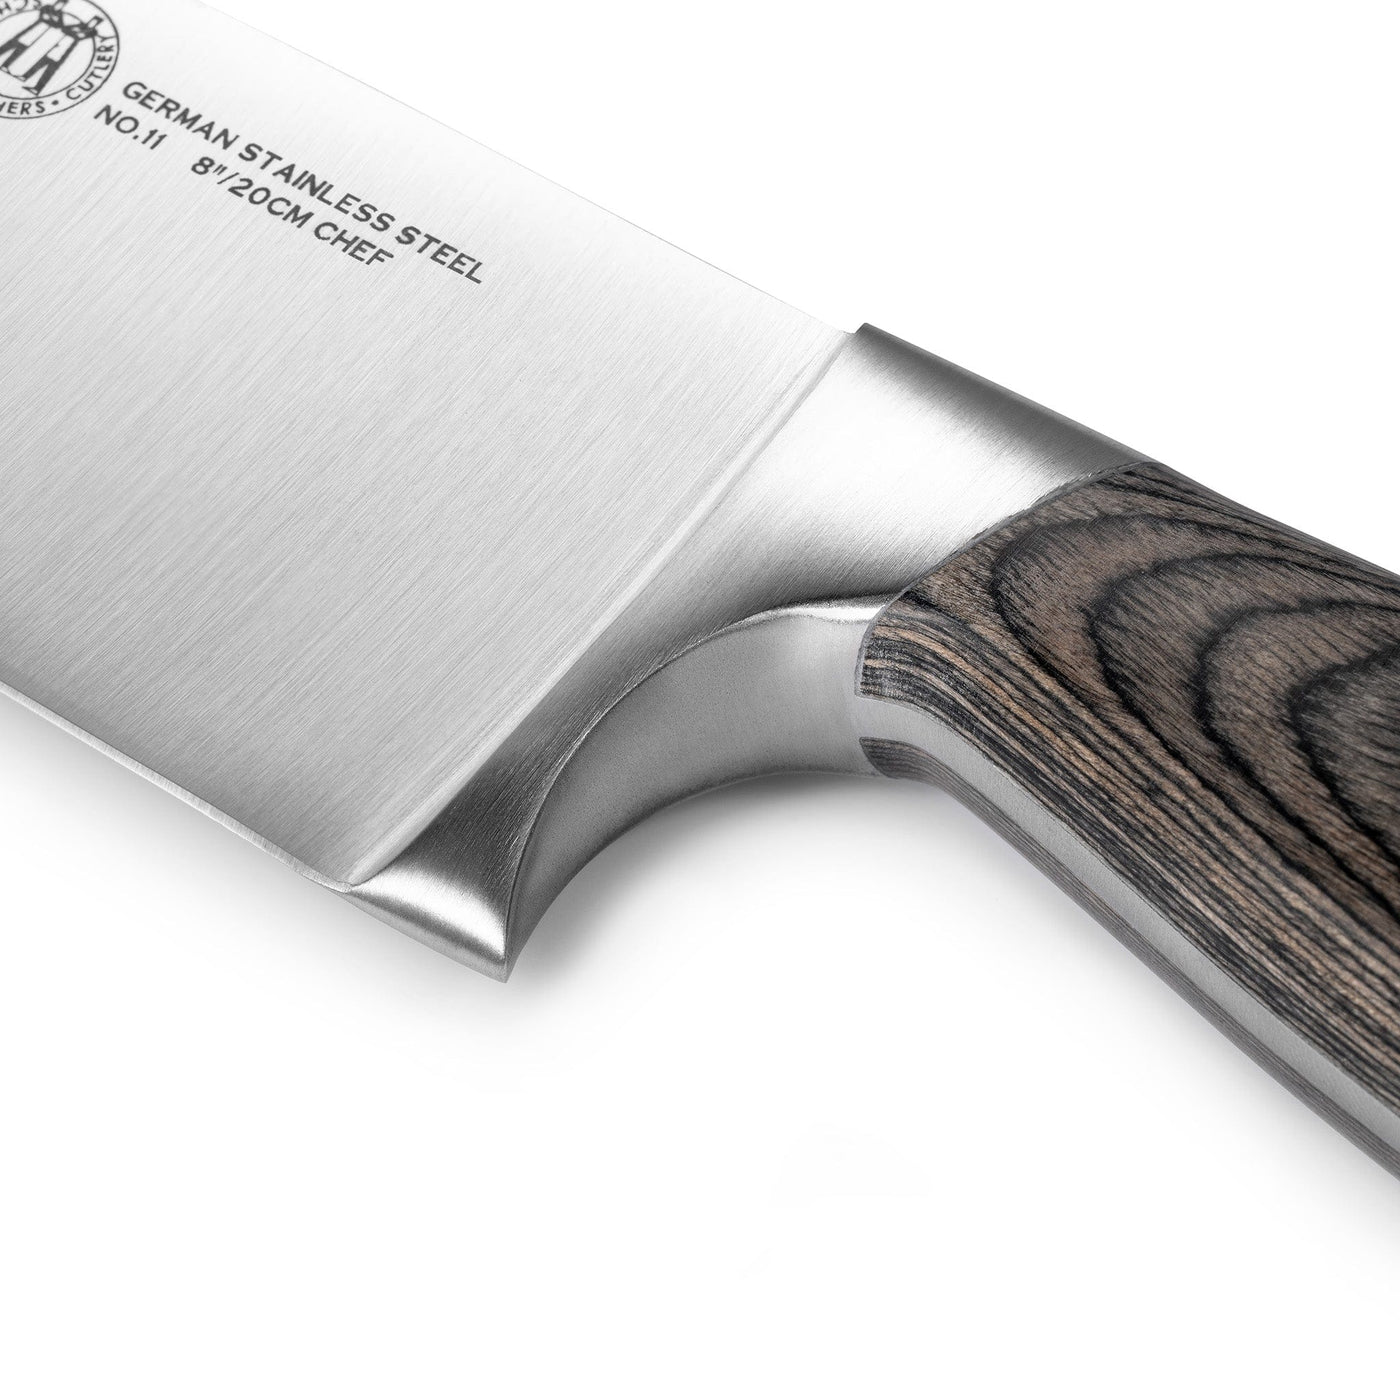 https://schmidtbrothers.com/cdn/shop/files/schmidt-brothers-kitchen-cutlery-schmidt-brothers-bonded-ash-7-piece-knife-set-high-carbon-stainless-steel-cutlery-with-black-ash-wood-and-acrylic-magnetic-knife-block-30758452920381_1400x.jpg?v=1684518758